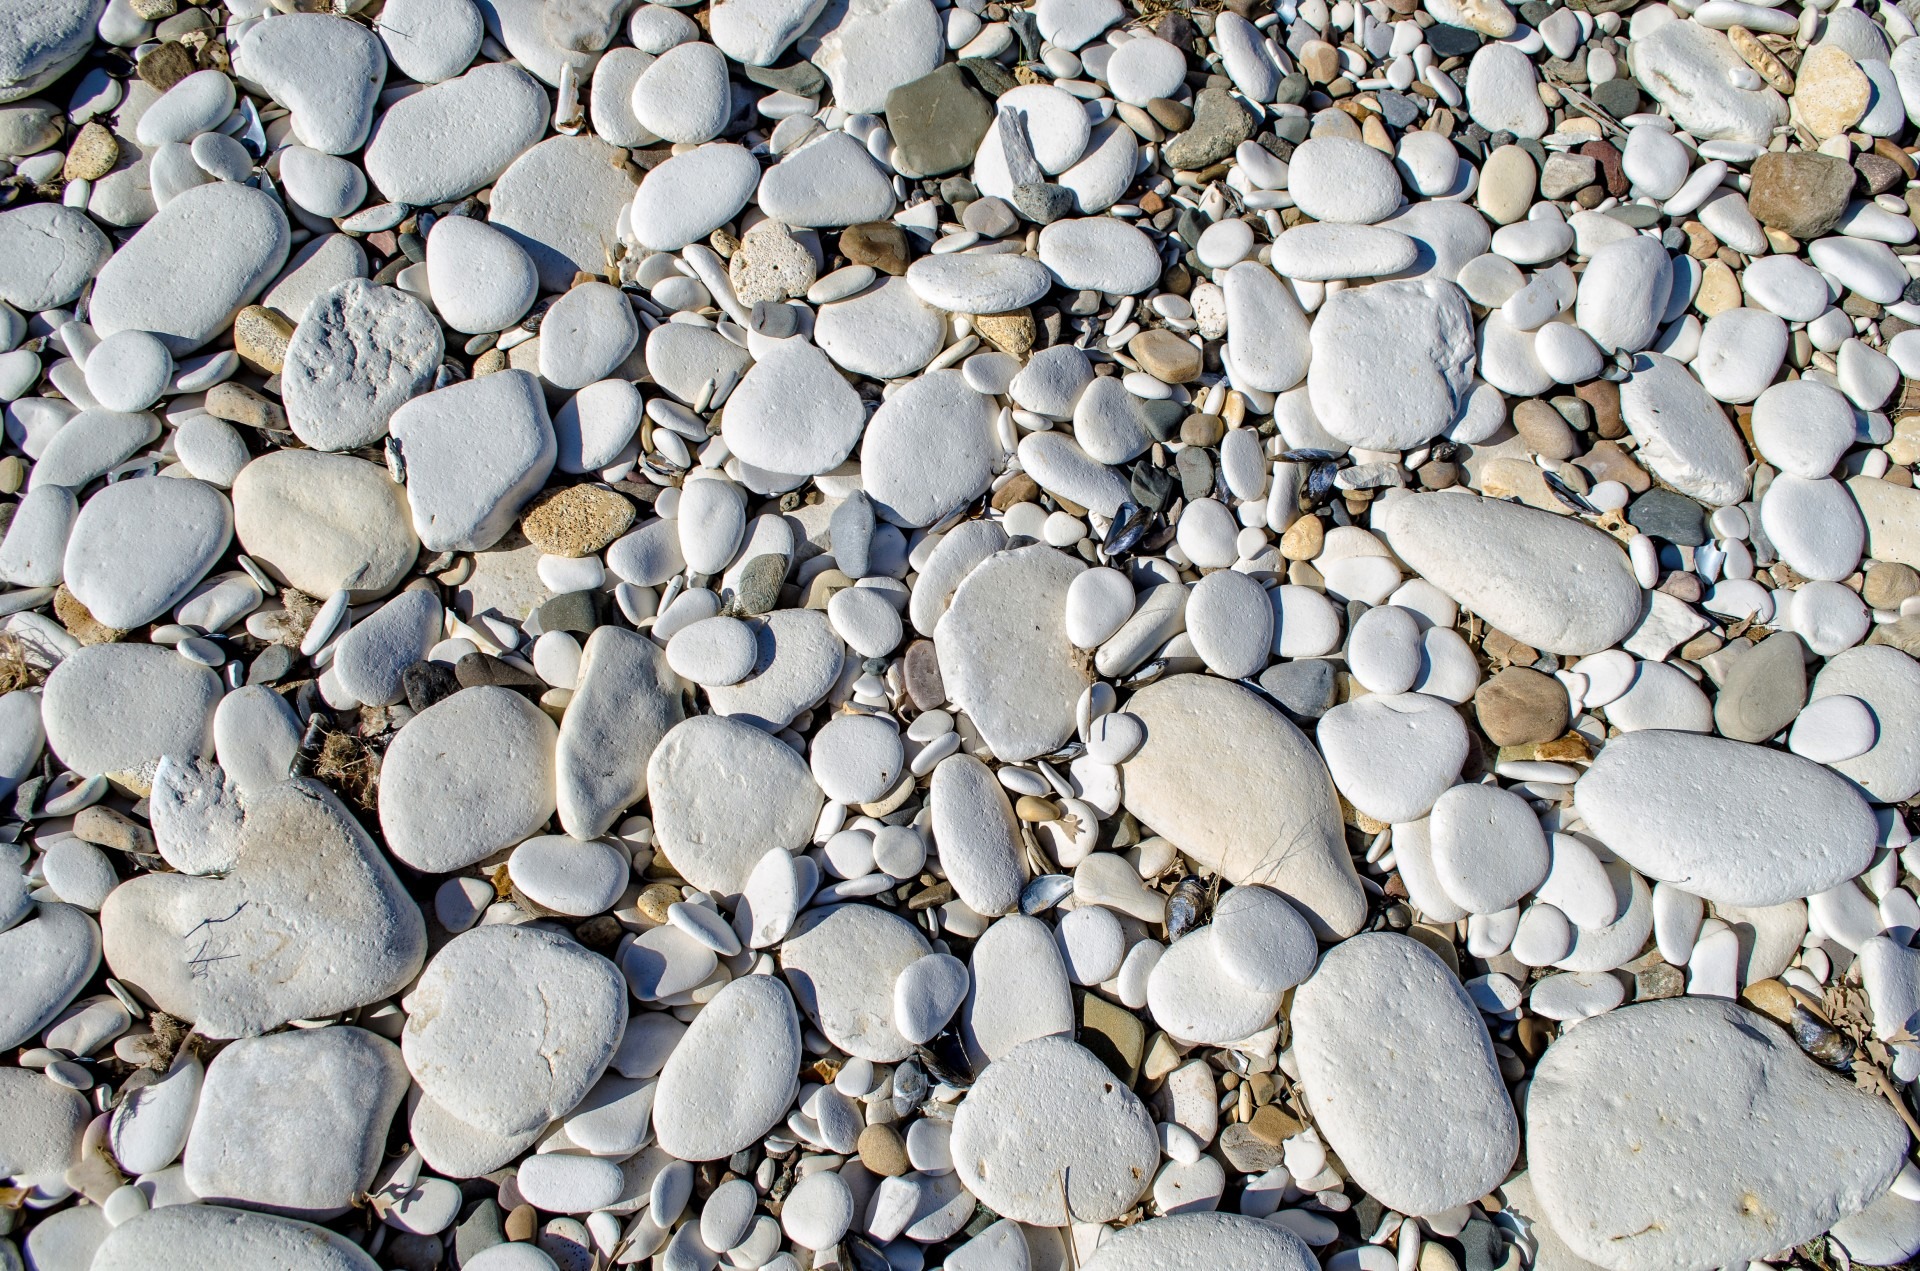 The shore of the beach is made of small stones